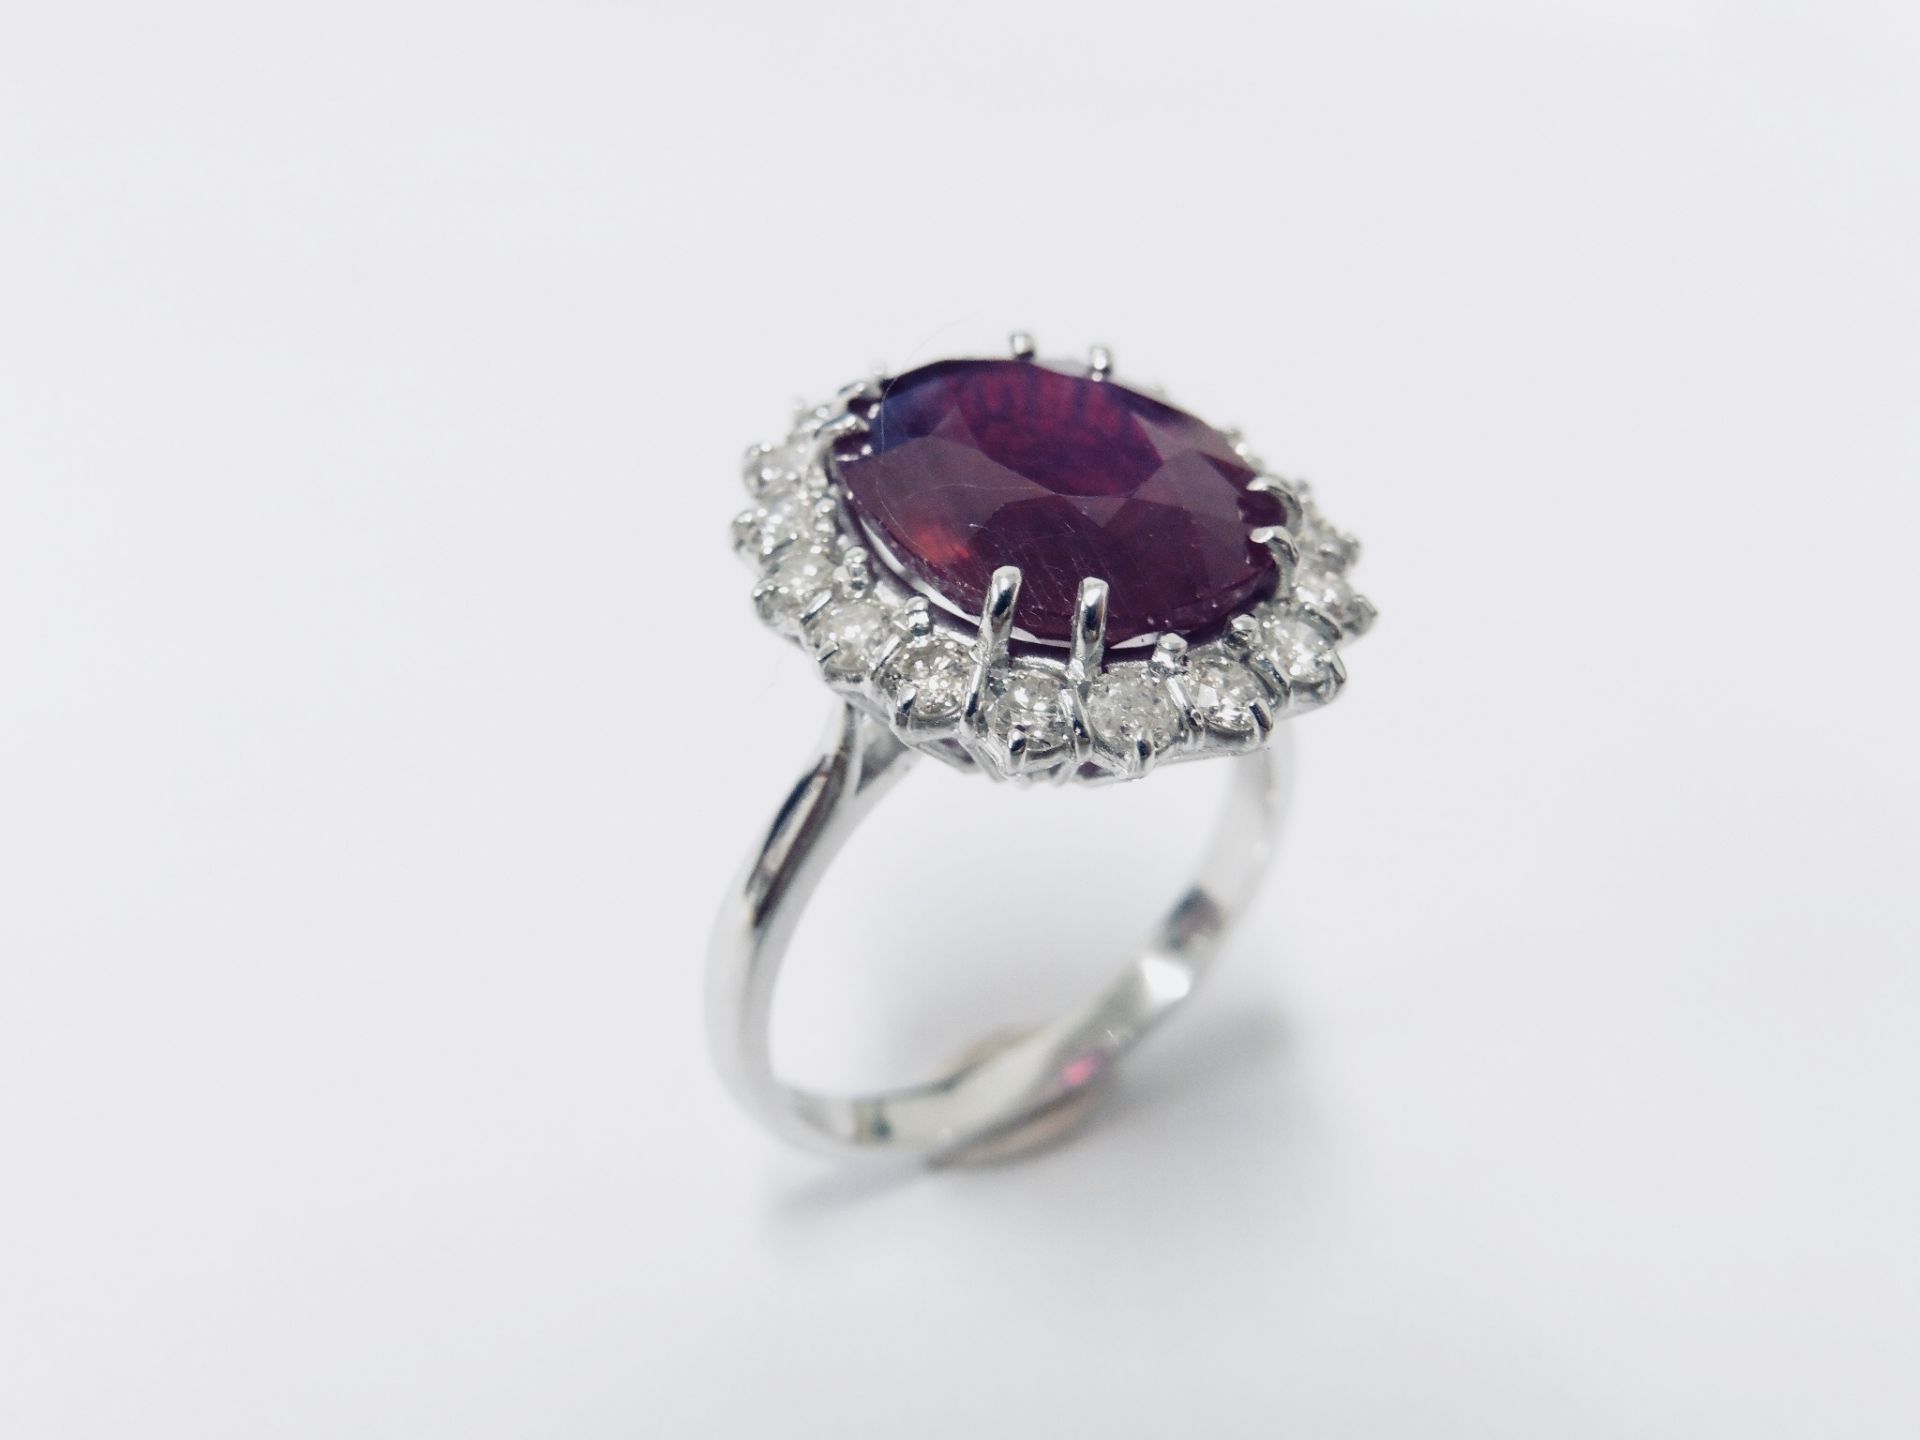 10ct ruby and diamond cluster ring. Oval cut ruby( glass filled) in the centre surrounded by - Bild 2 aus 5